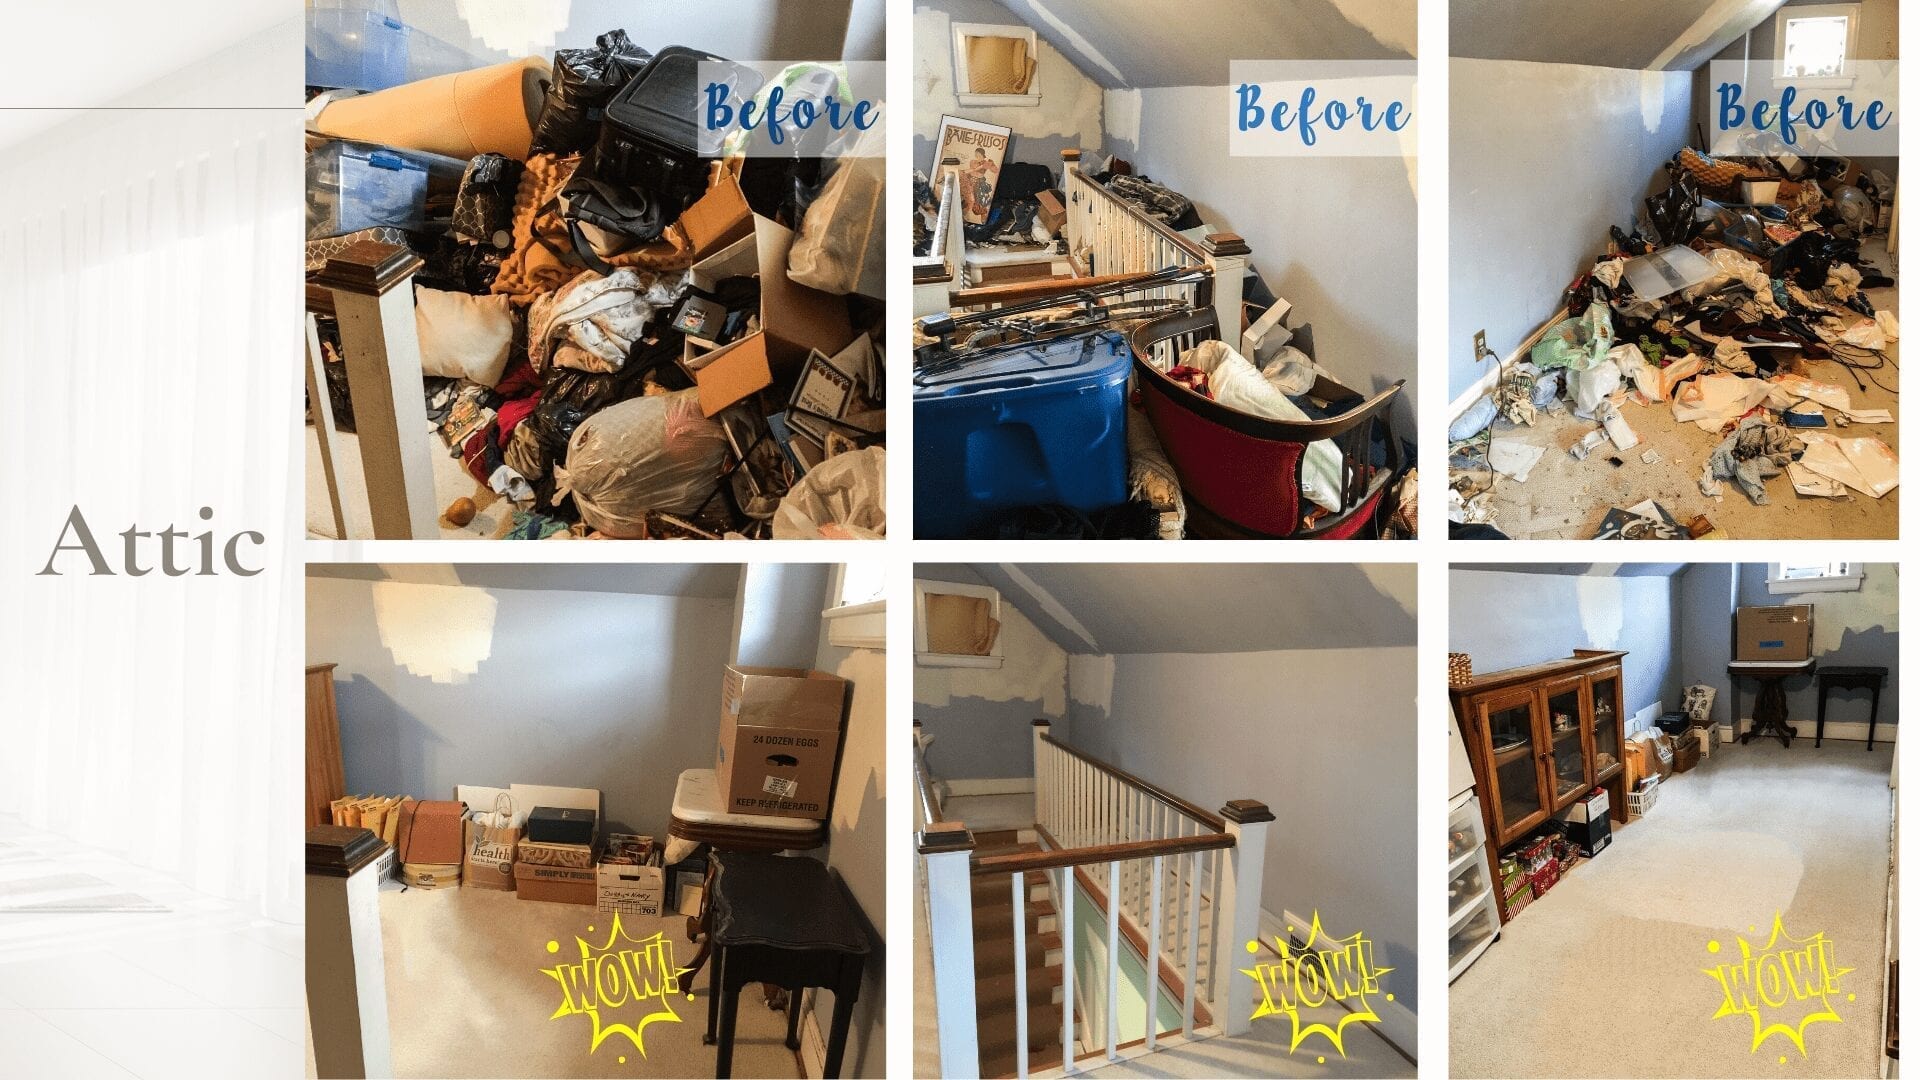 Professional Organizer or Cleaning Service? - ClutterBGone